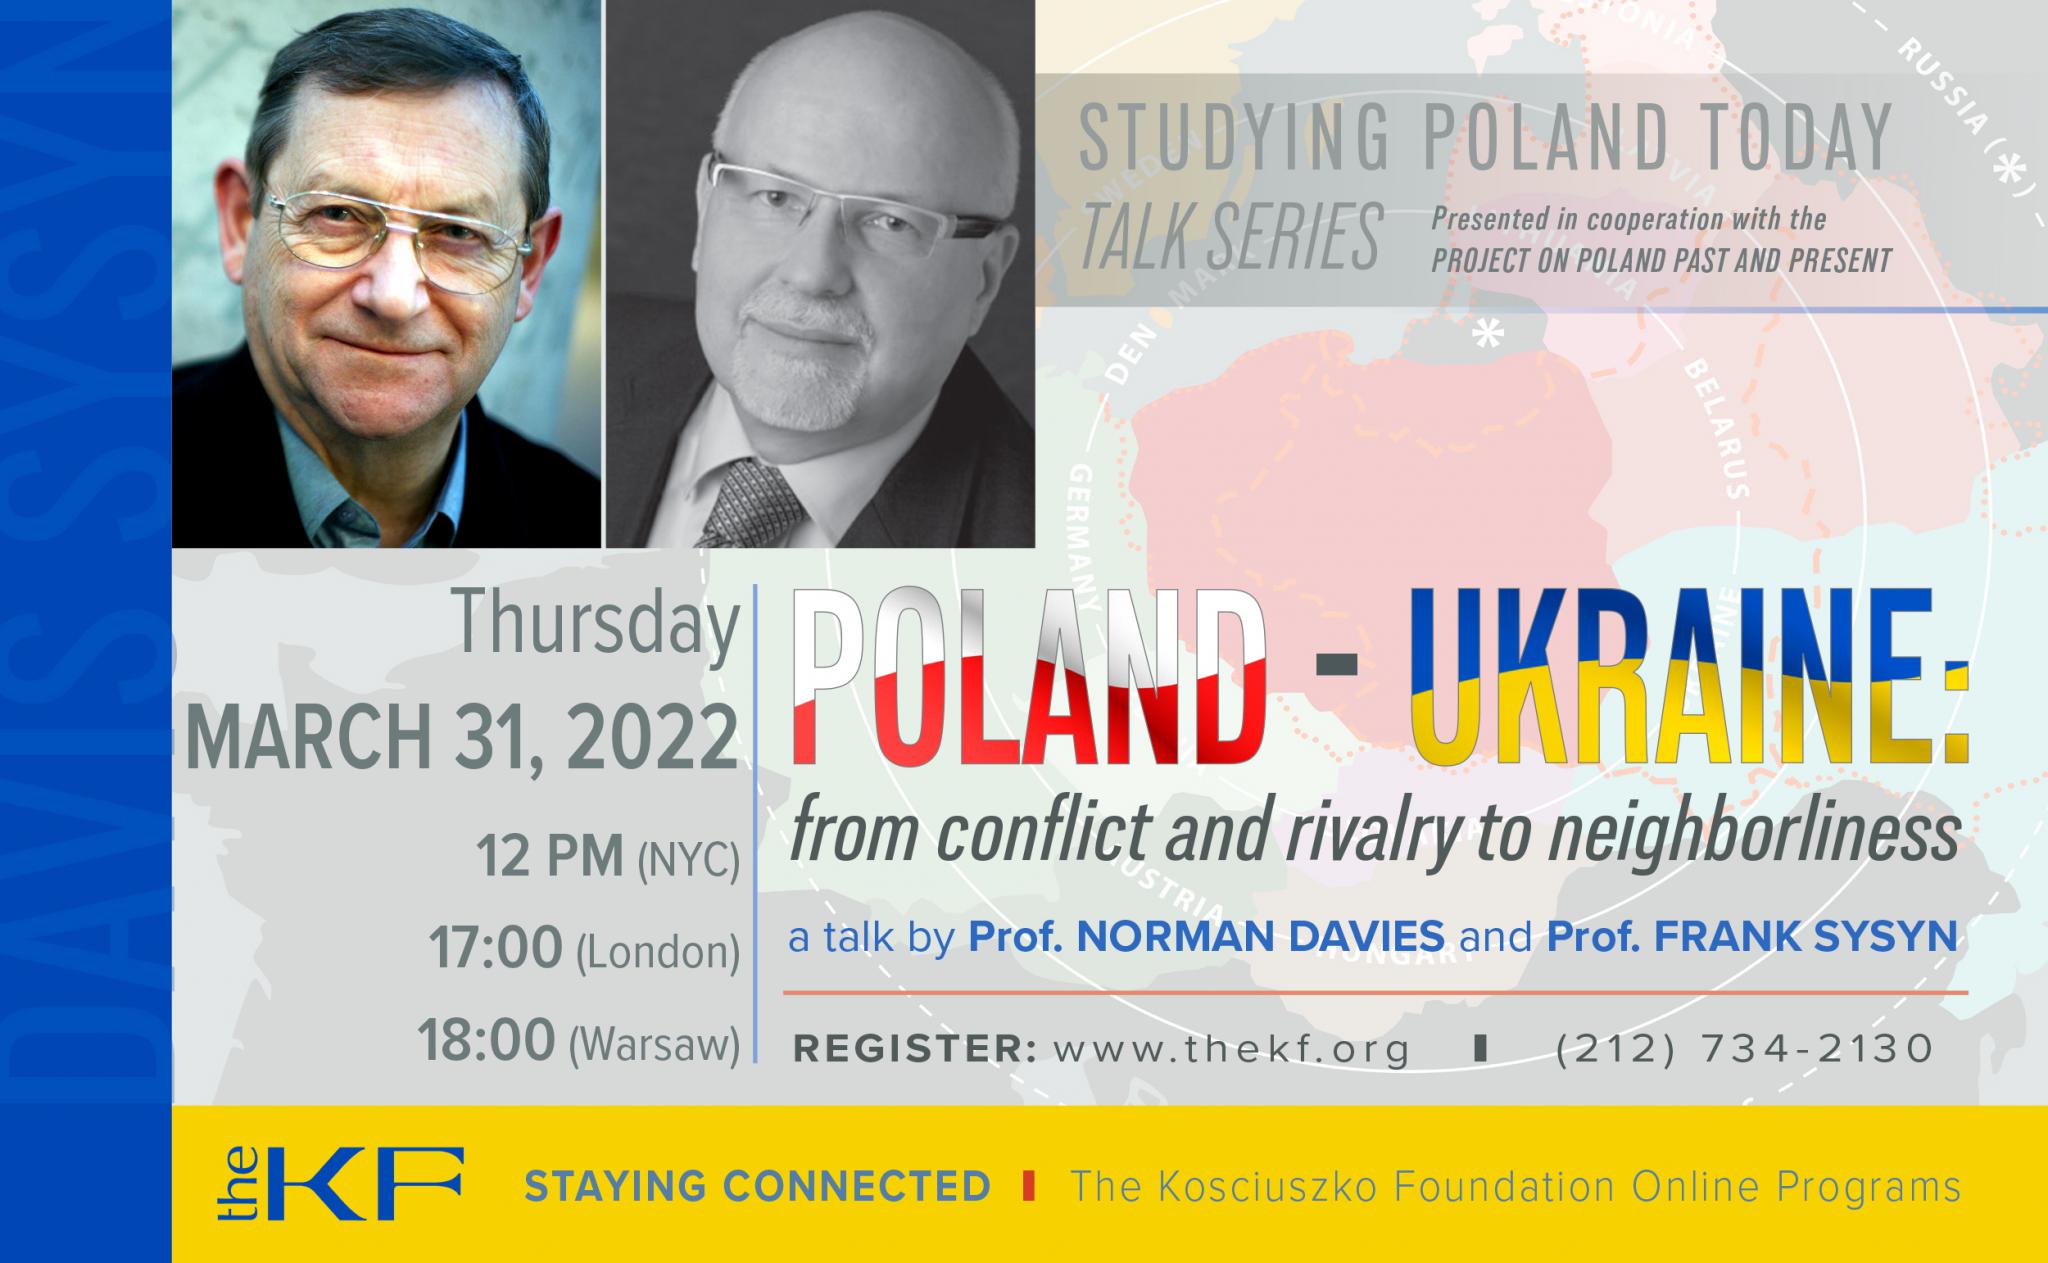 "Poland-Ukraine: From conflict and rivalry to neighborliness" - a talk by Prof. Norman Davies and Prof. Frank Sysyn